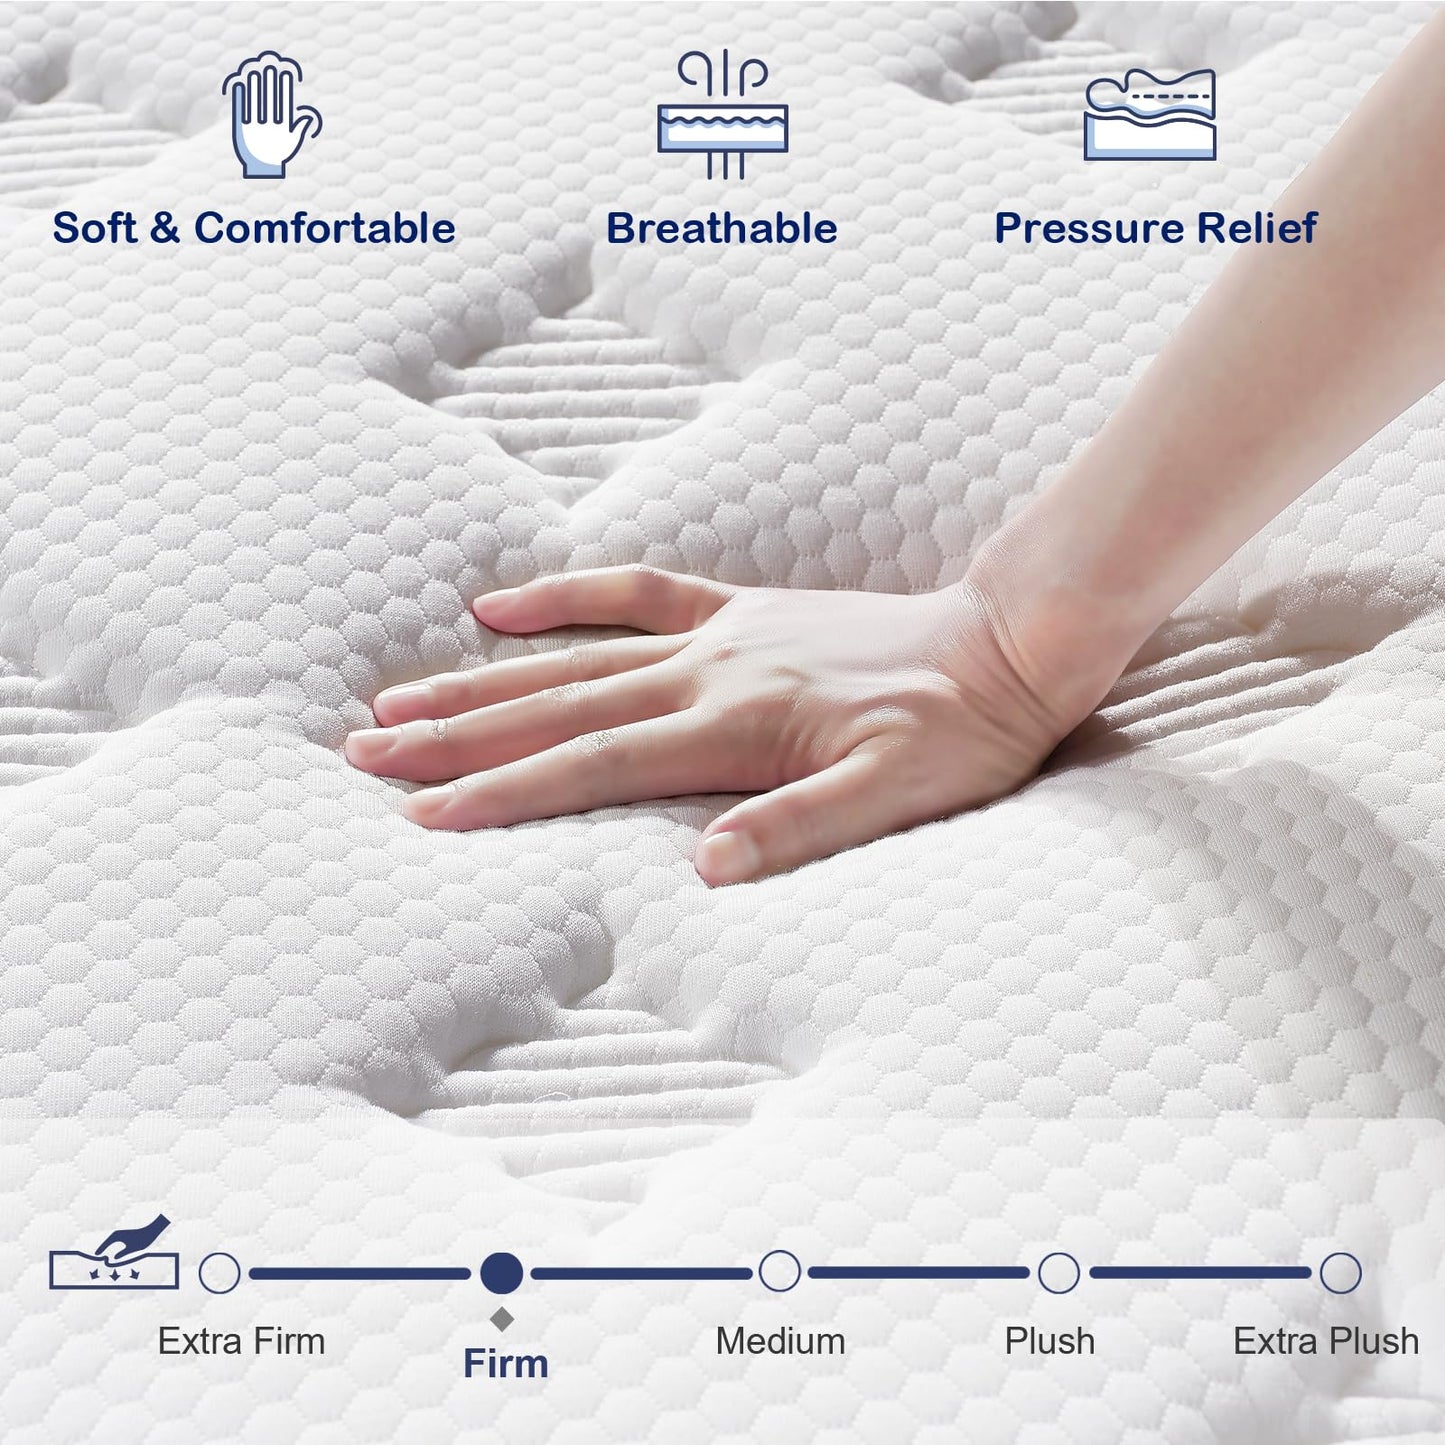 EEN EEN SLEEP California King Mattress - Upgrade Strengthen - 12 Inch Hybrid Cal King Mattress in a Box, Mattress King Size with Memory Foam and Independent Pocket Springs, Strong Edge Support, Firm